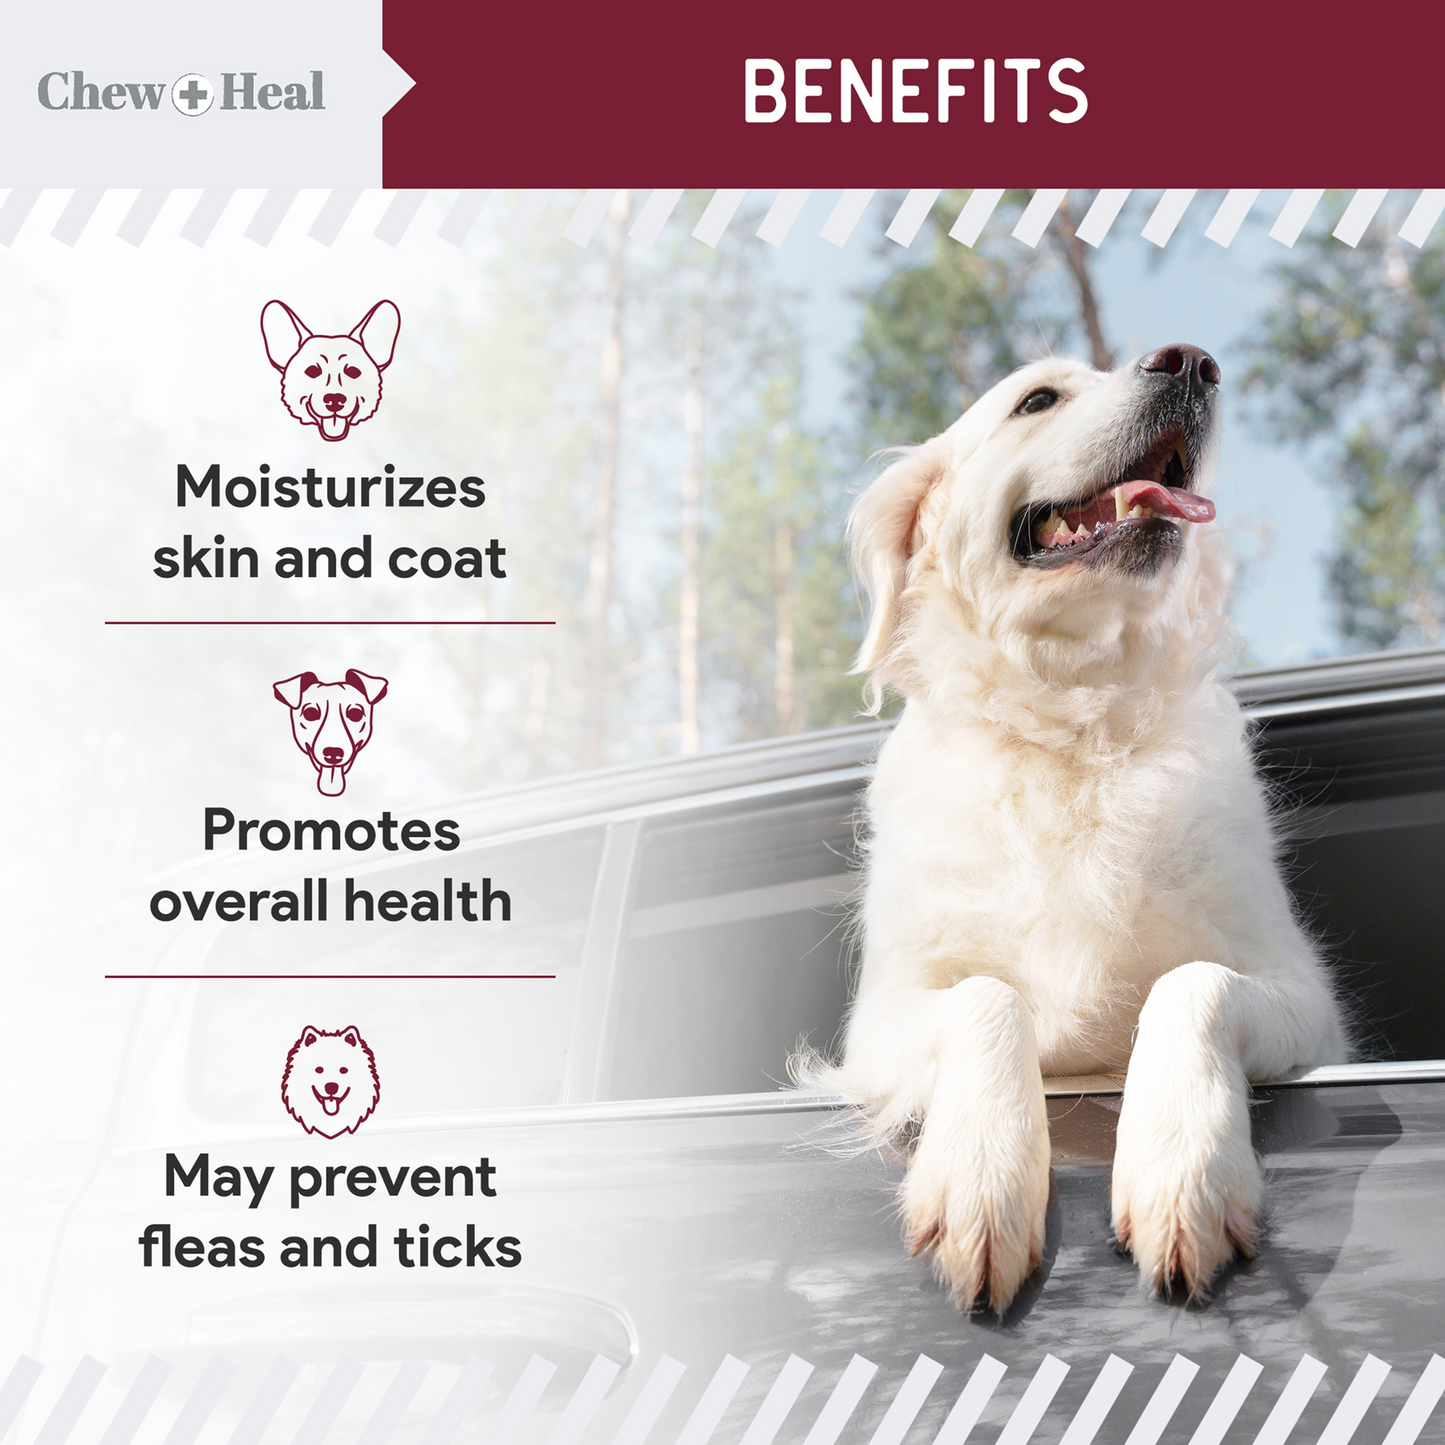 Chewable Flea and Tick Prevention for Dogs